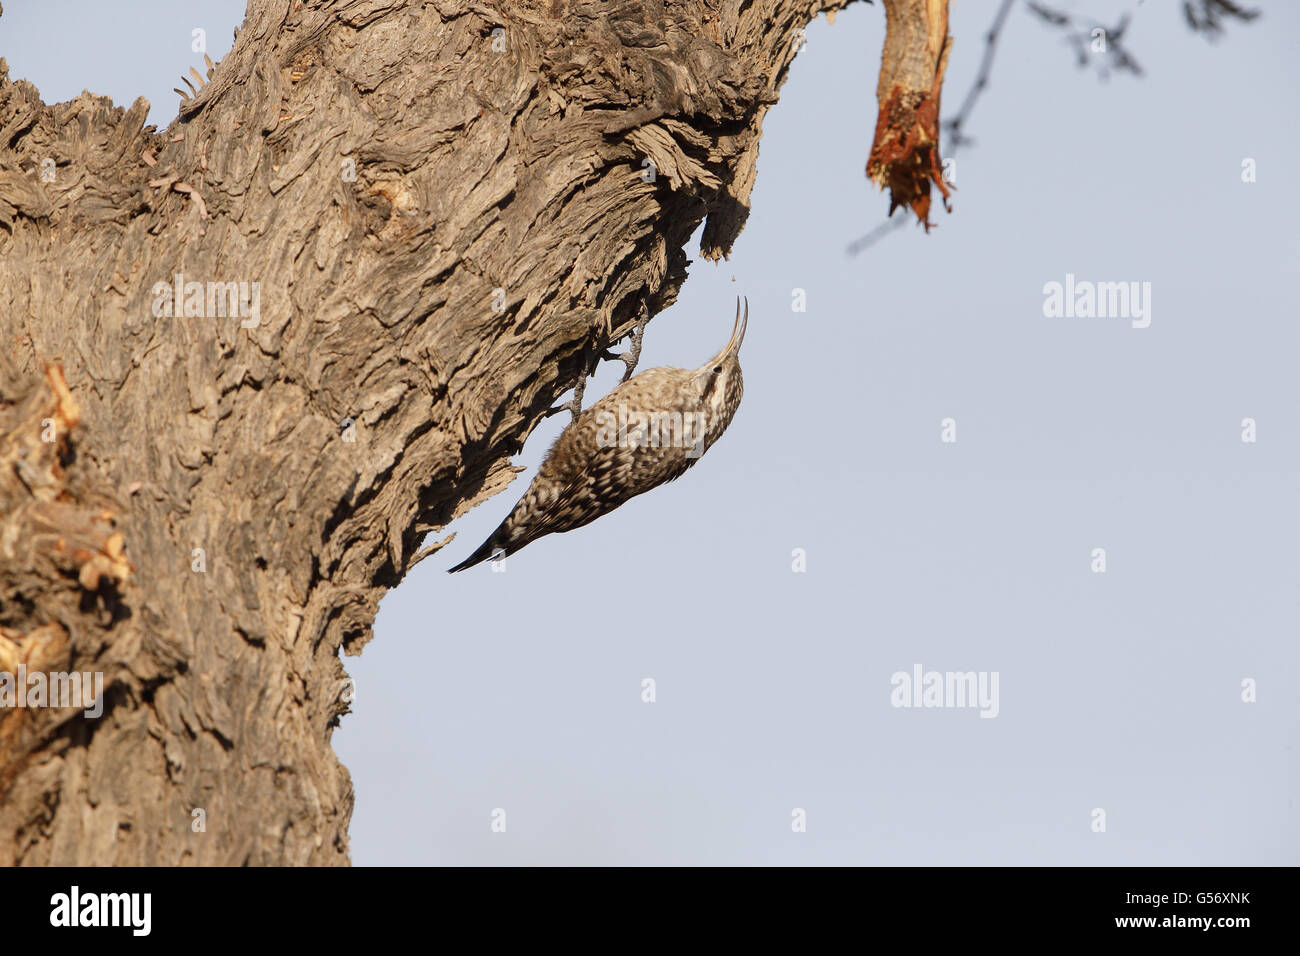 Indian Spotted Creeper (Salpornis spilonotus) adult, tossing food item into air, clinging to tree trunk, Tal Chhapar, Thar Desert, Rajasthan, India, February Stock Photo